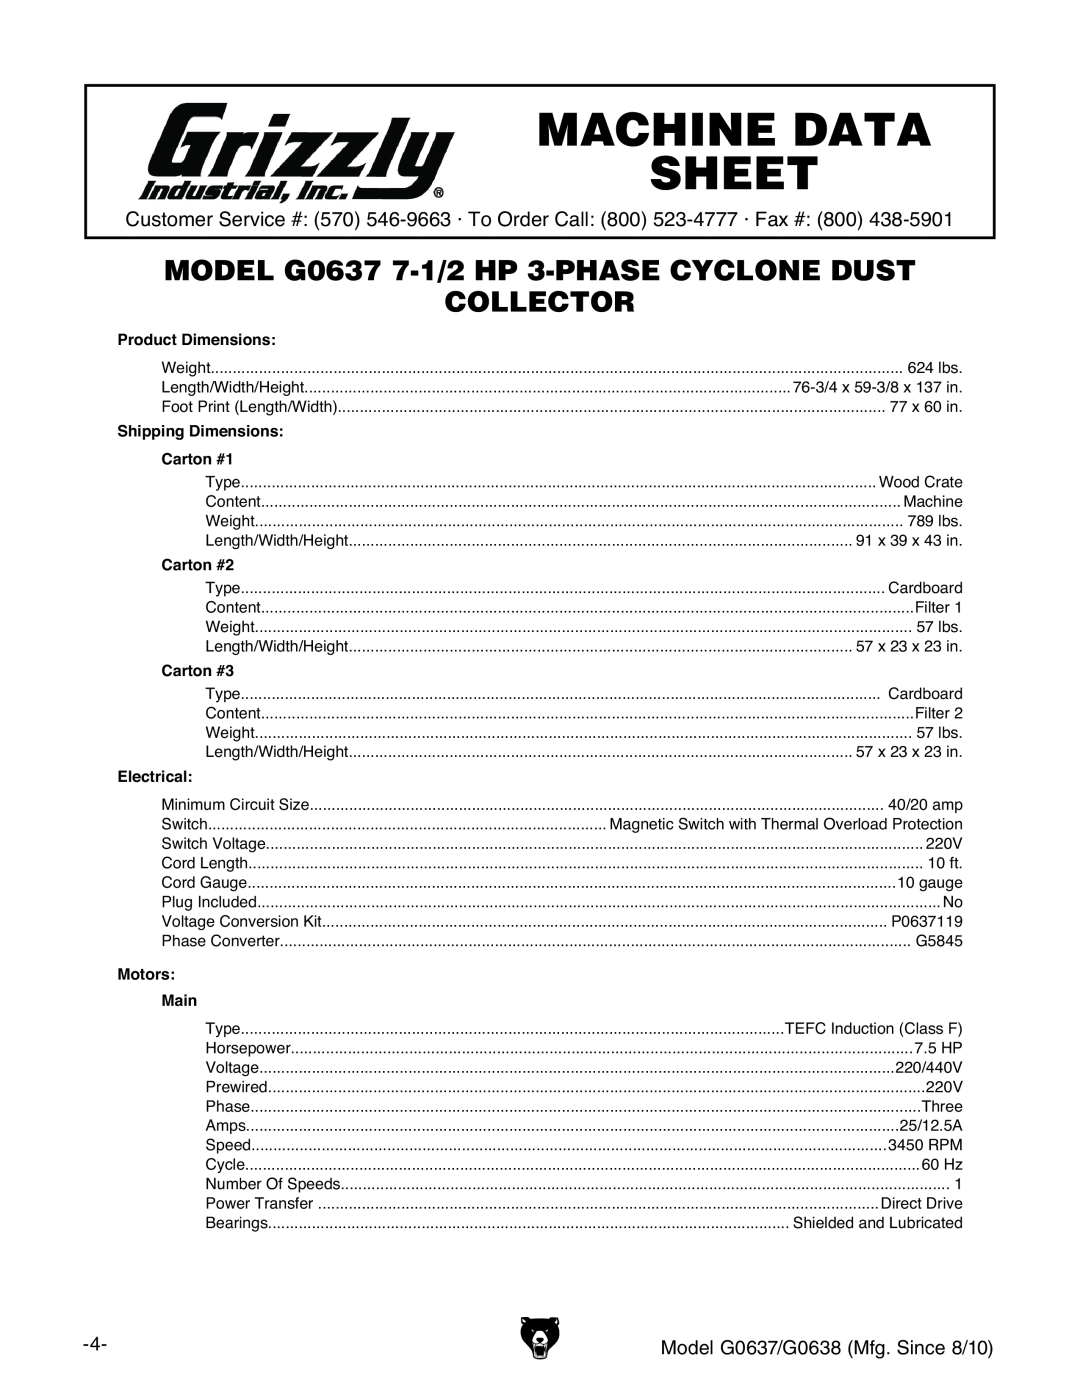 Grizzly Machine Data Sheet, MODEL G0637 7-1/2HP 3-PHASECYCLONE DUST COLLECTOR, Product Dimensions, Shipping Dimensions 